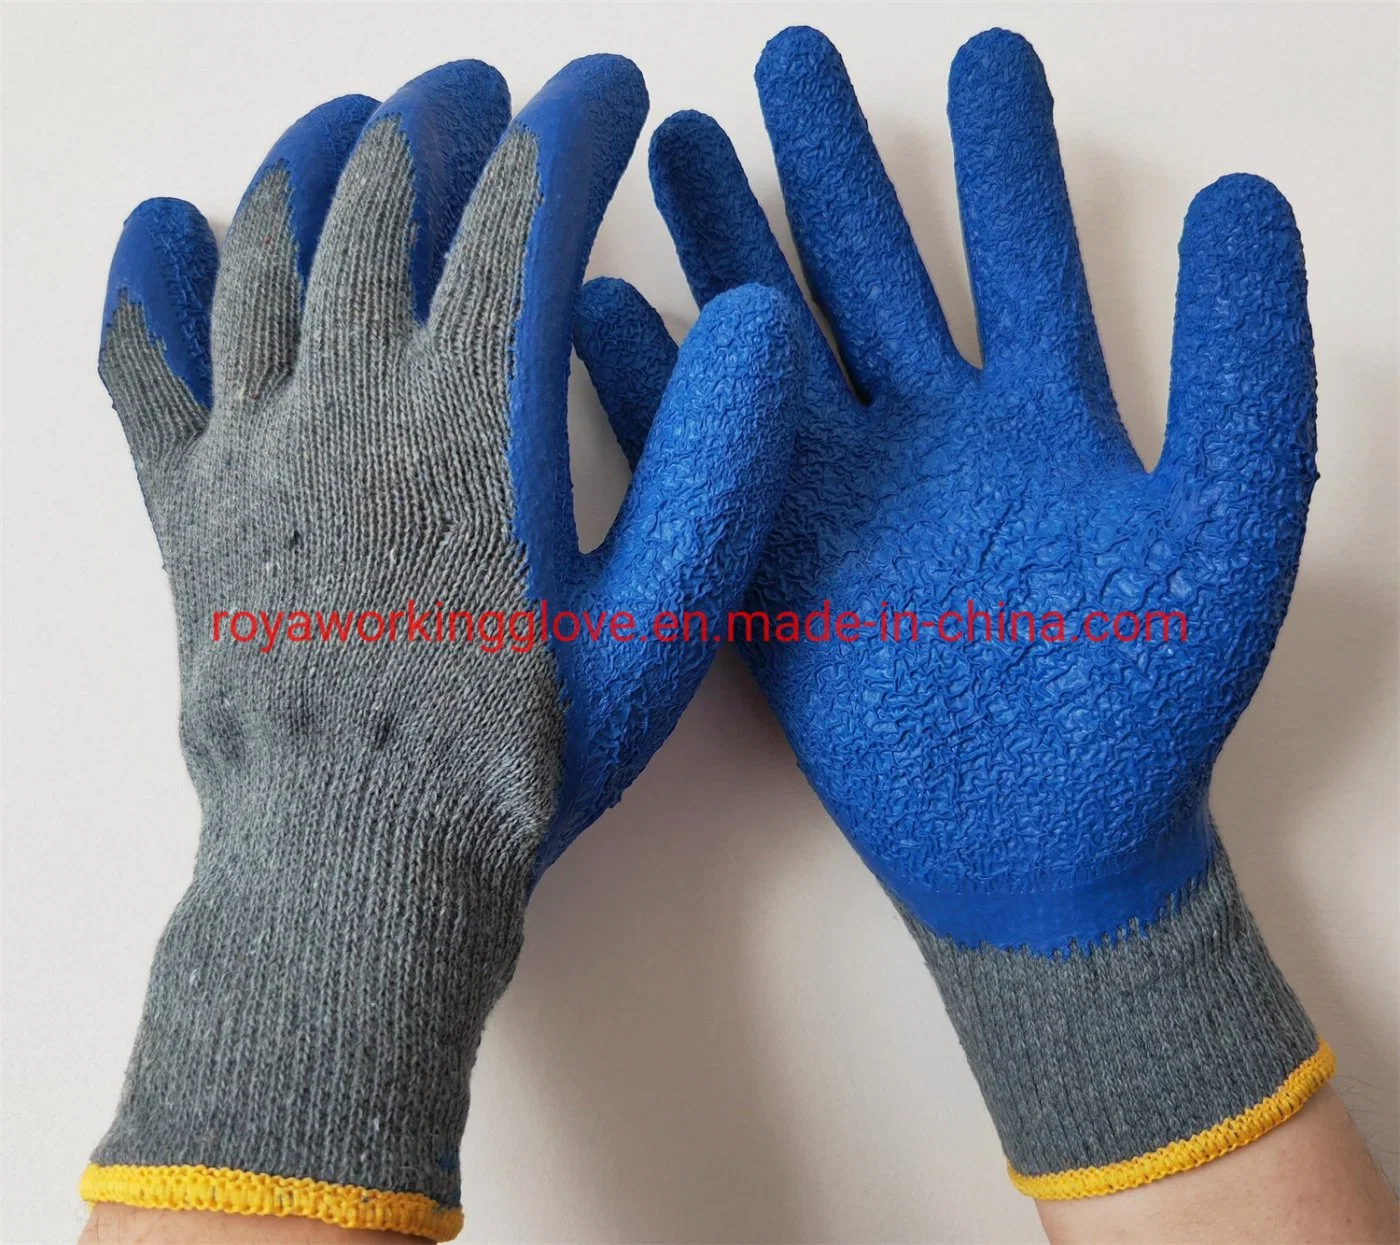 10gauge Cotton Gloves Thumb Fully Coating Industry Safety Work Gloves /Anti-Slip Gloves /Guantes/Mit/Industrial Working Gloves /Construction Gloves